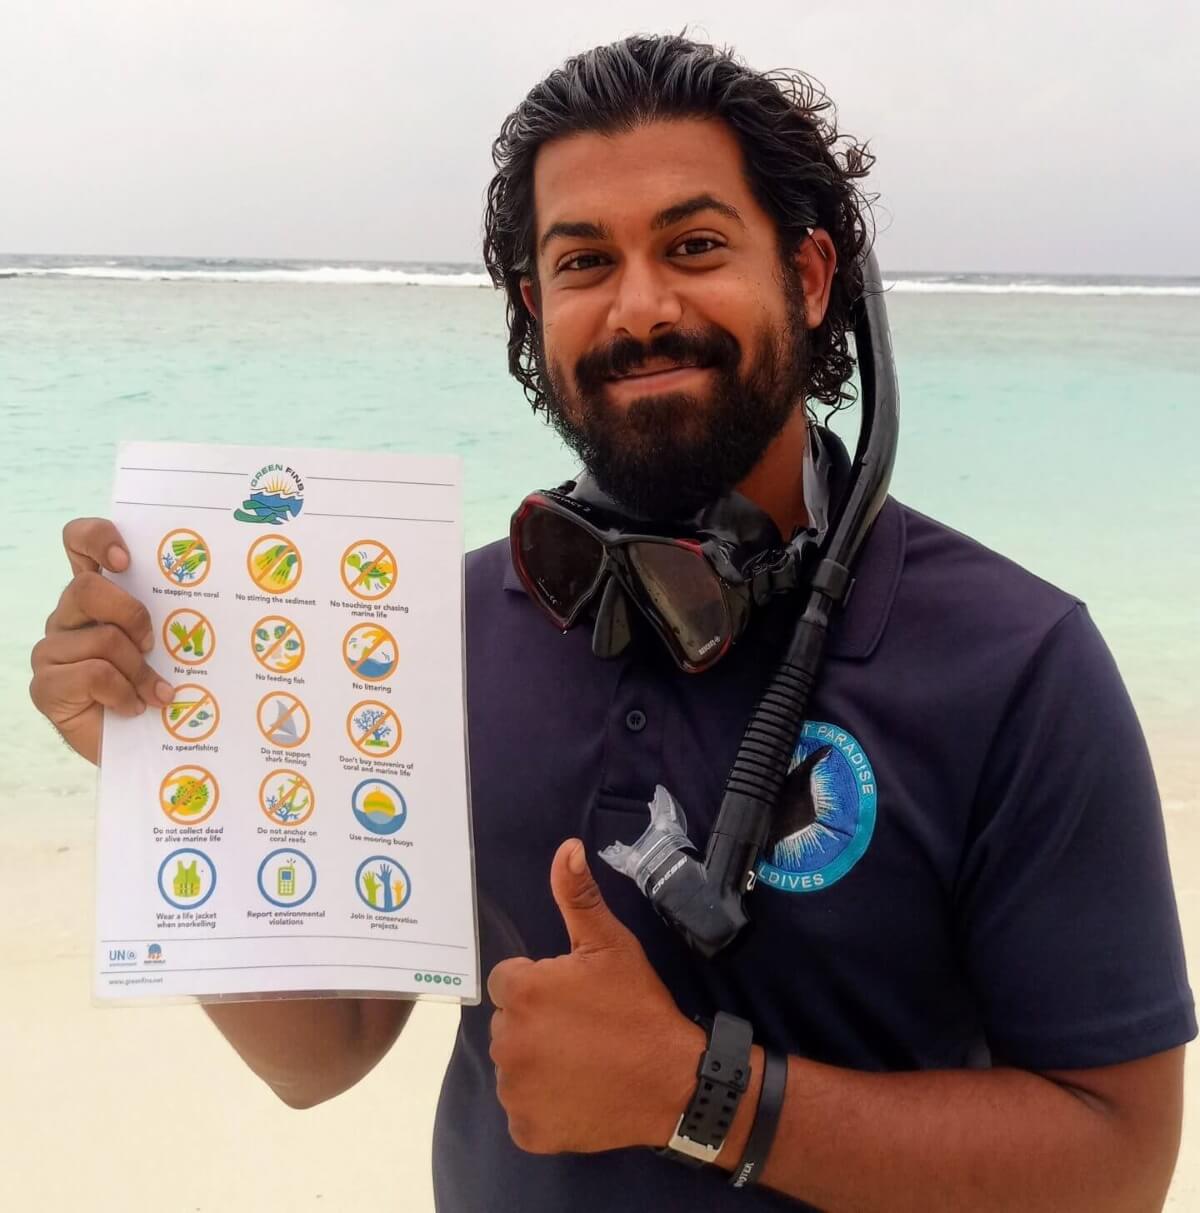 secret paradise staff member shows the list of things not to do in the ocean